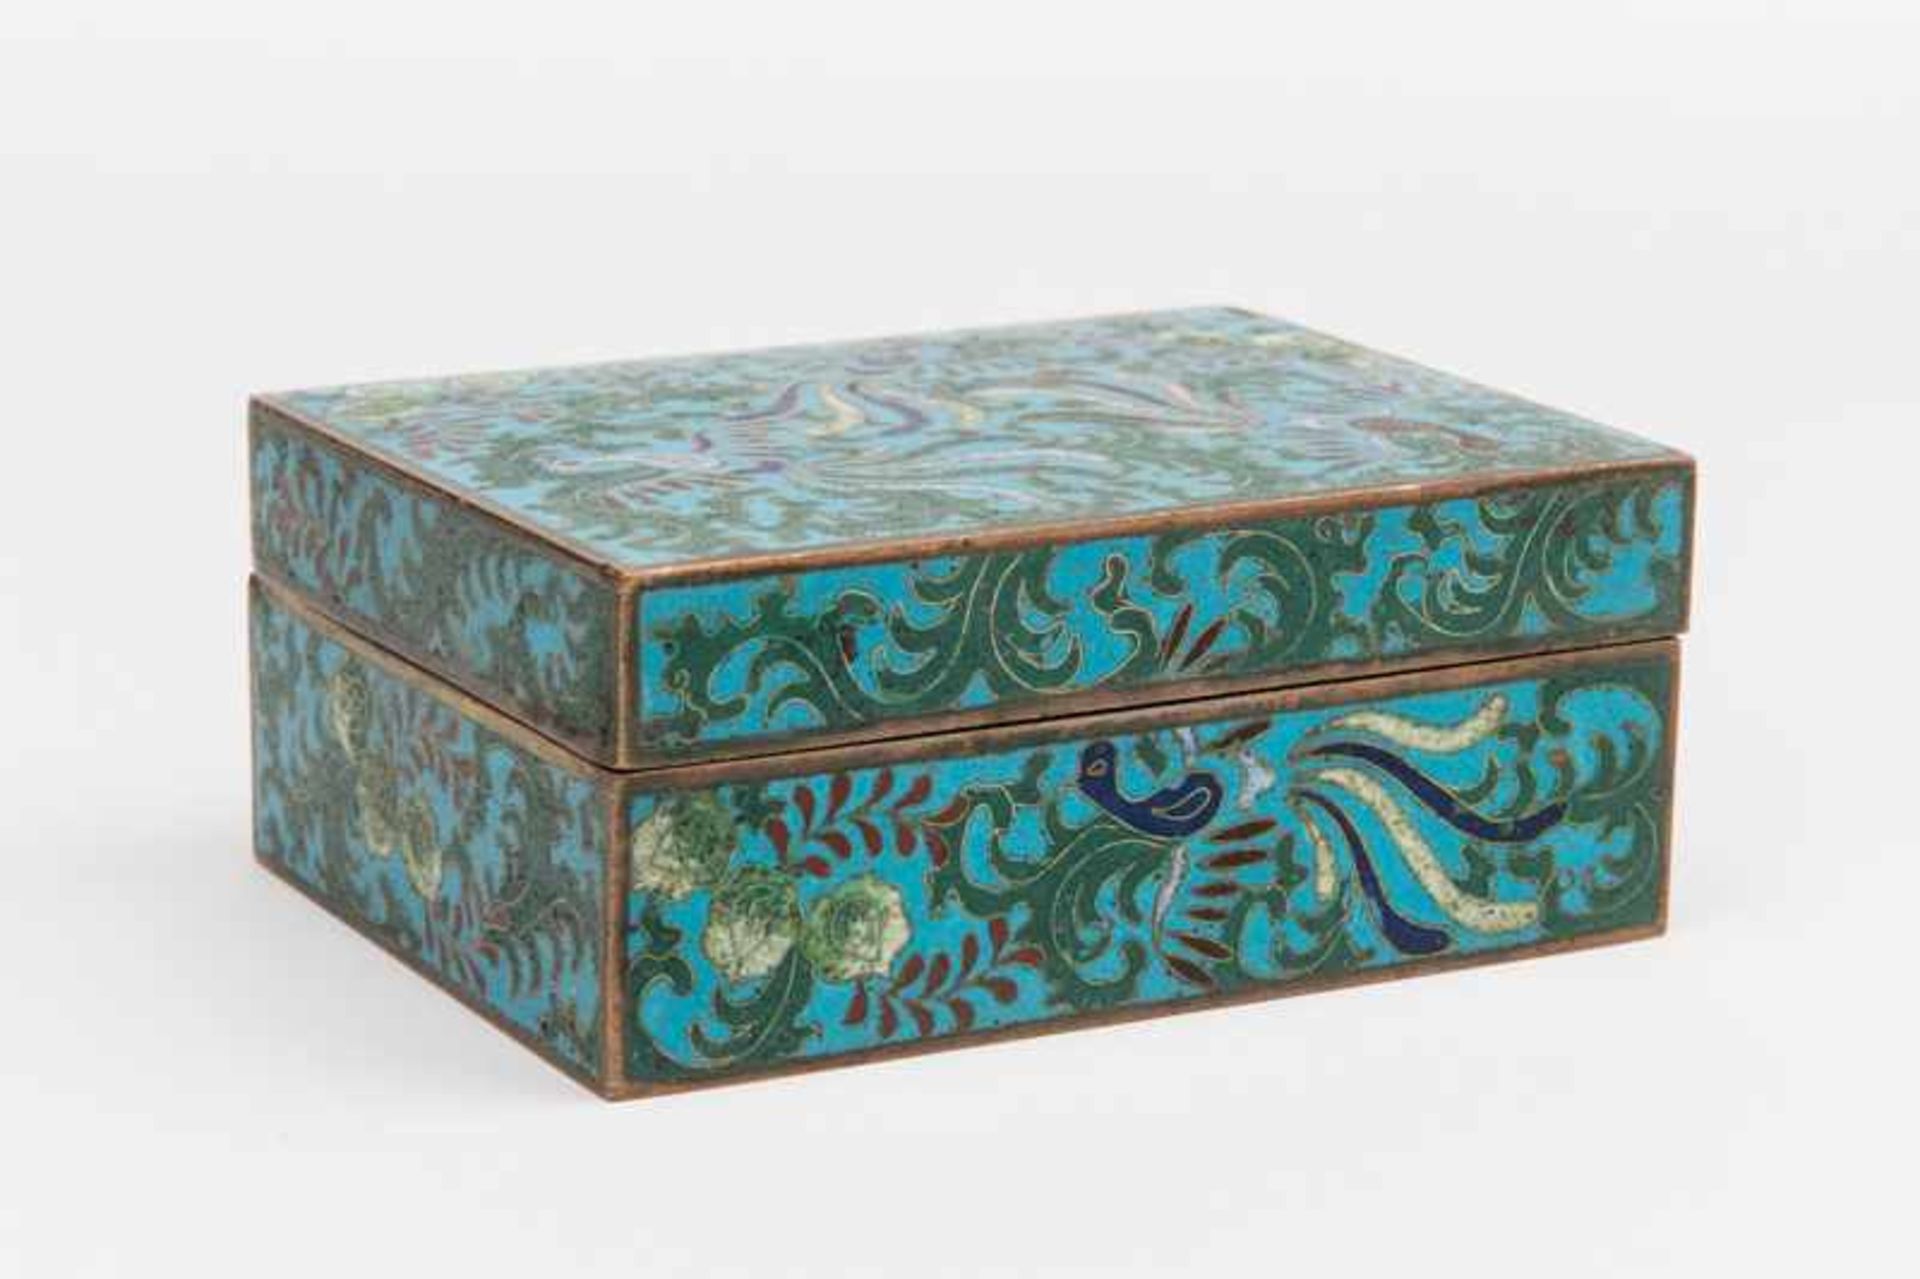 BOX WITH COVER HOLDING PHOENIXES Enamel cloisonne. China, Qing dynasty (1644-1911)A rectangular